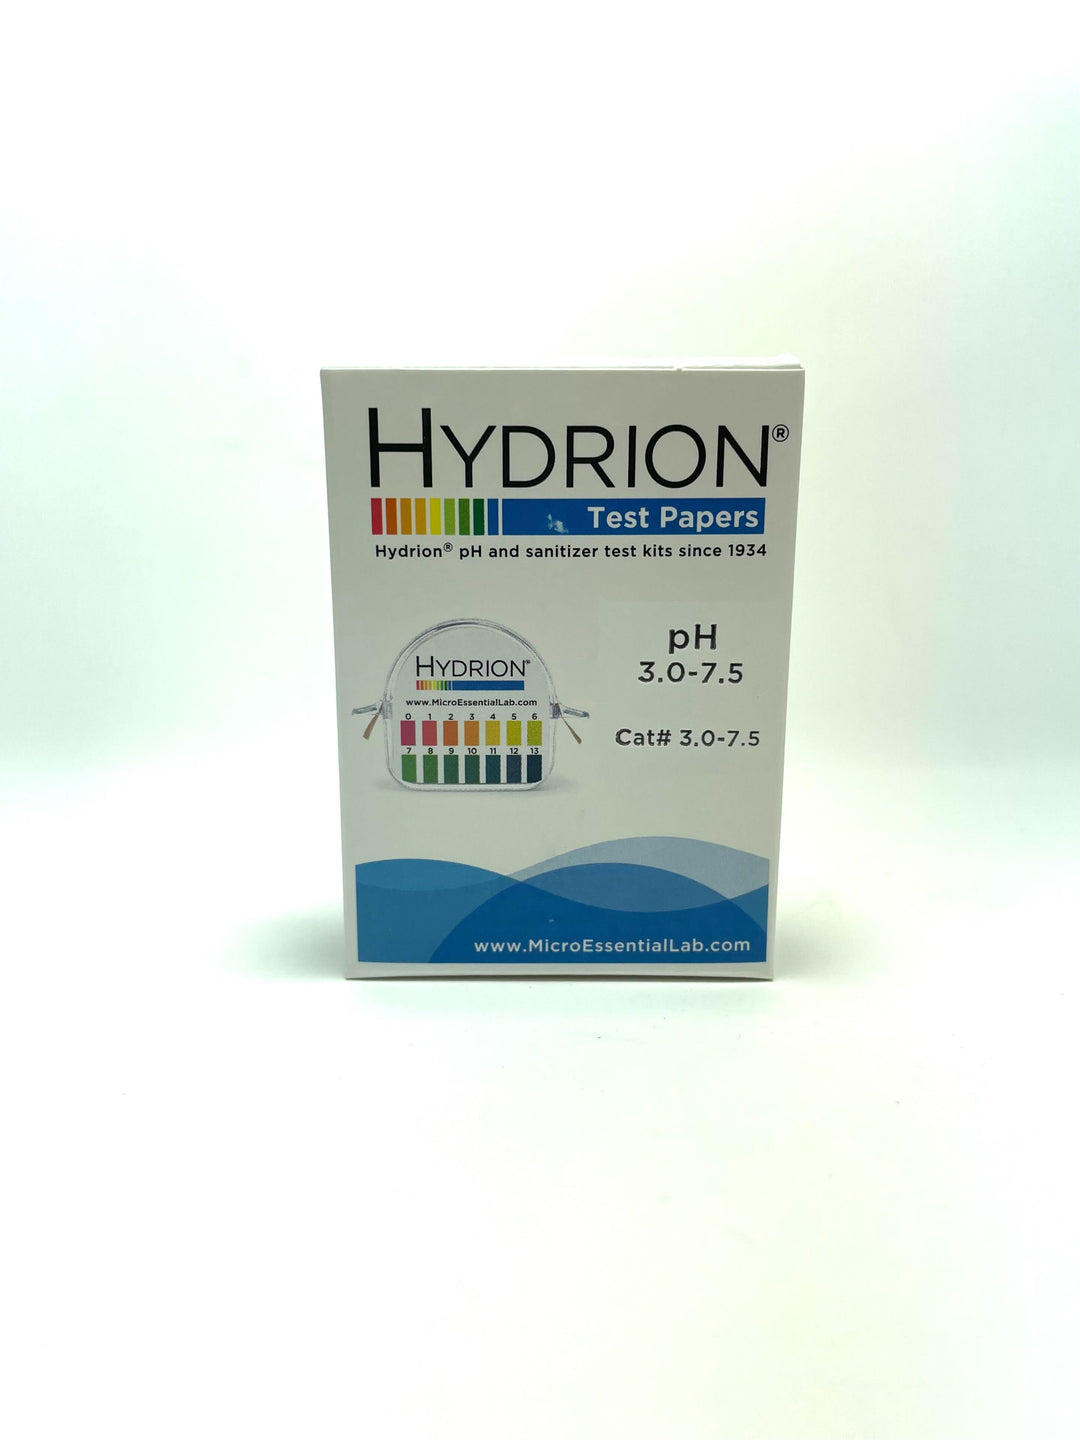 Hydrion pH Test Papers - Double roll